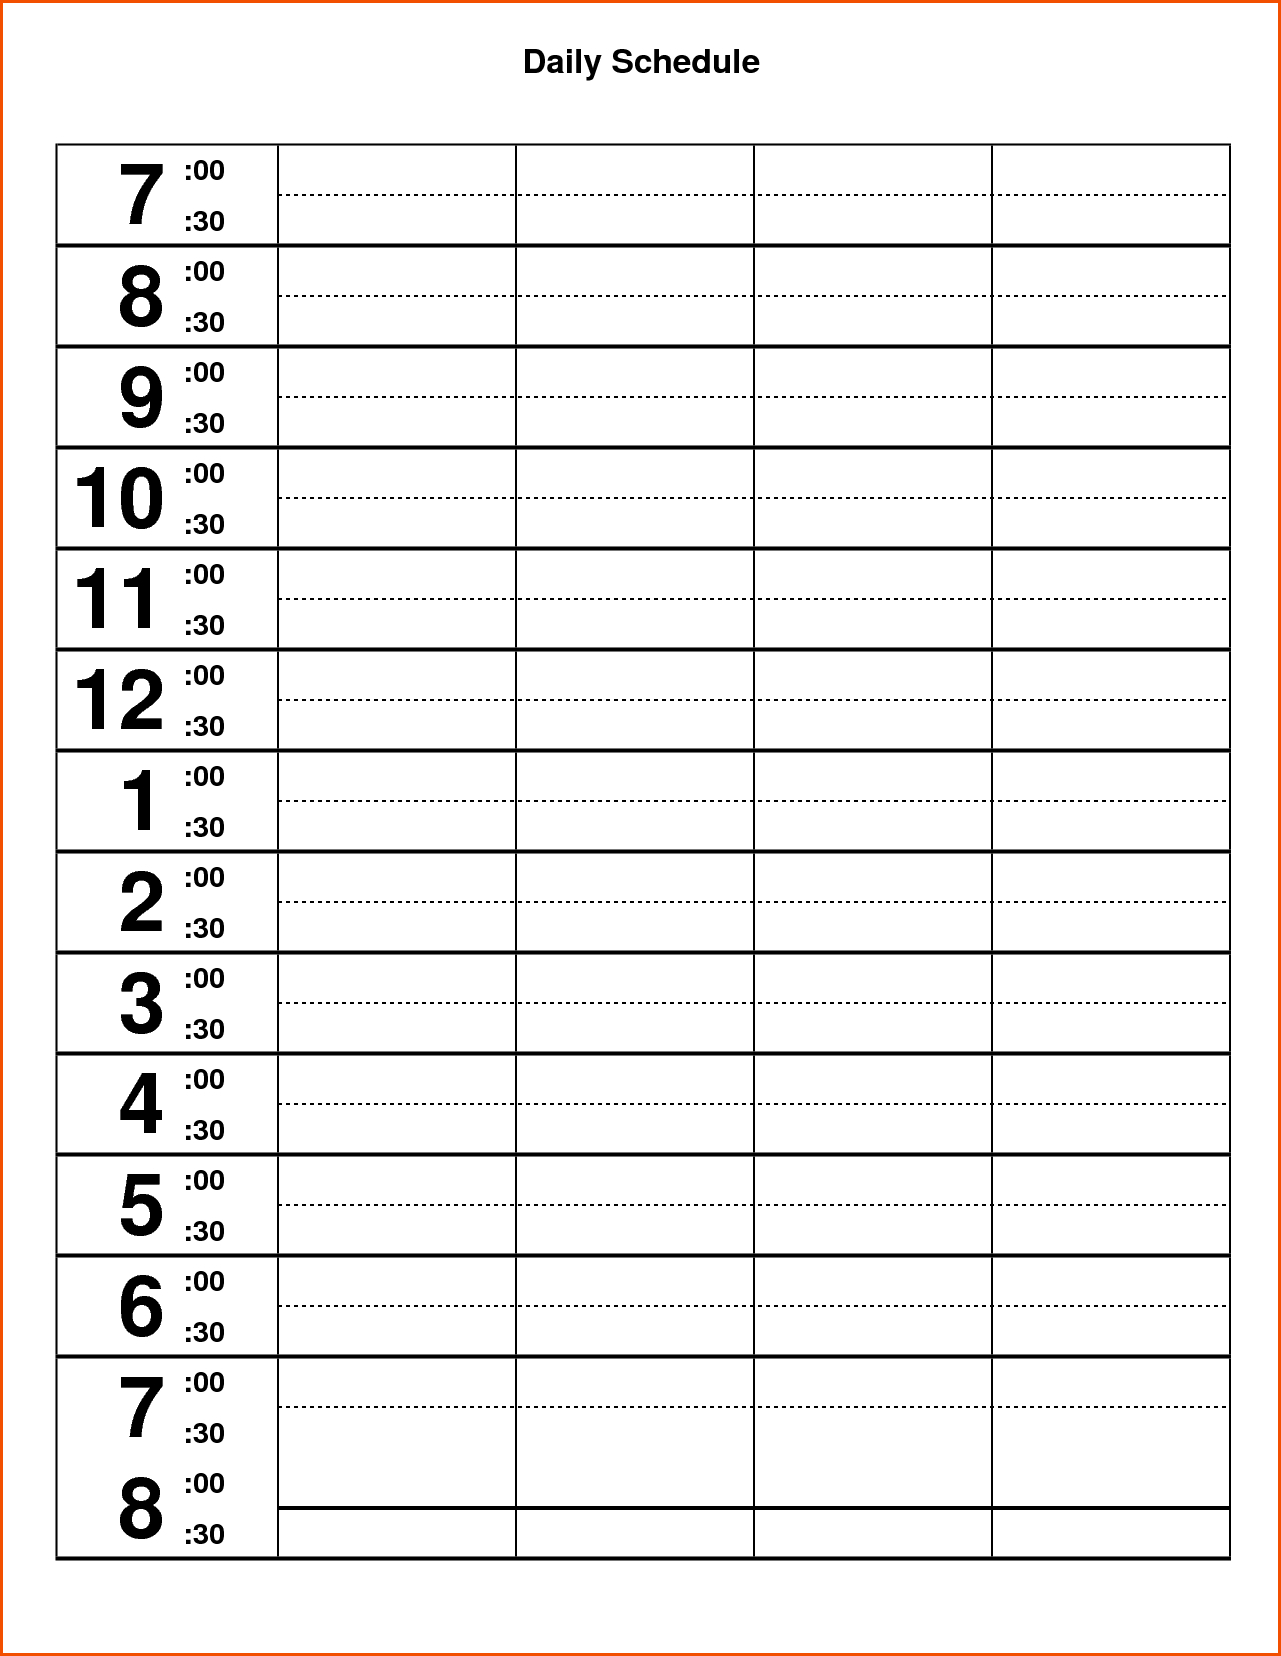 71 Customize Our Free Daily Calendar Template With Time regarding Free Printable Daily Calendar With Time Slots